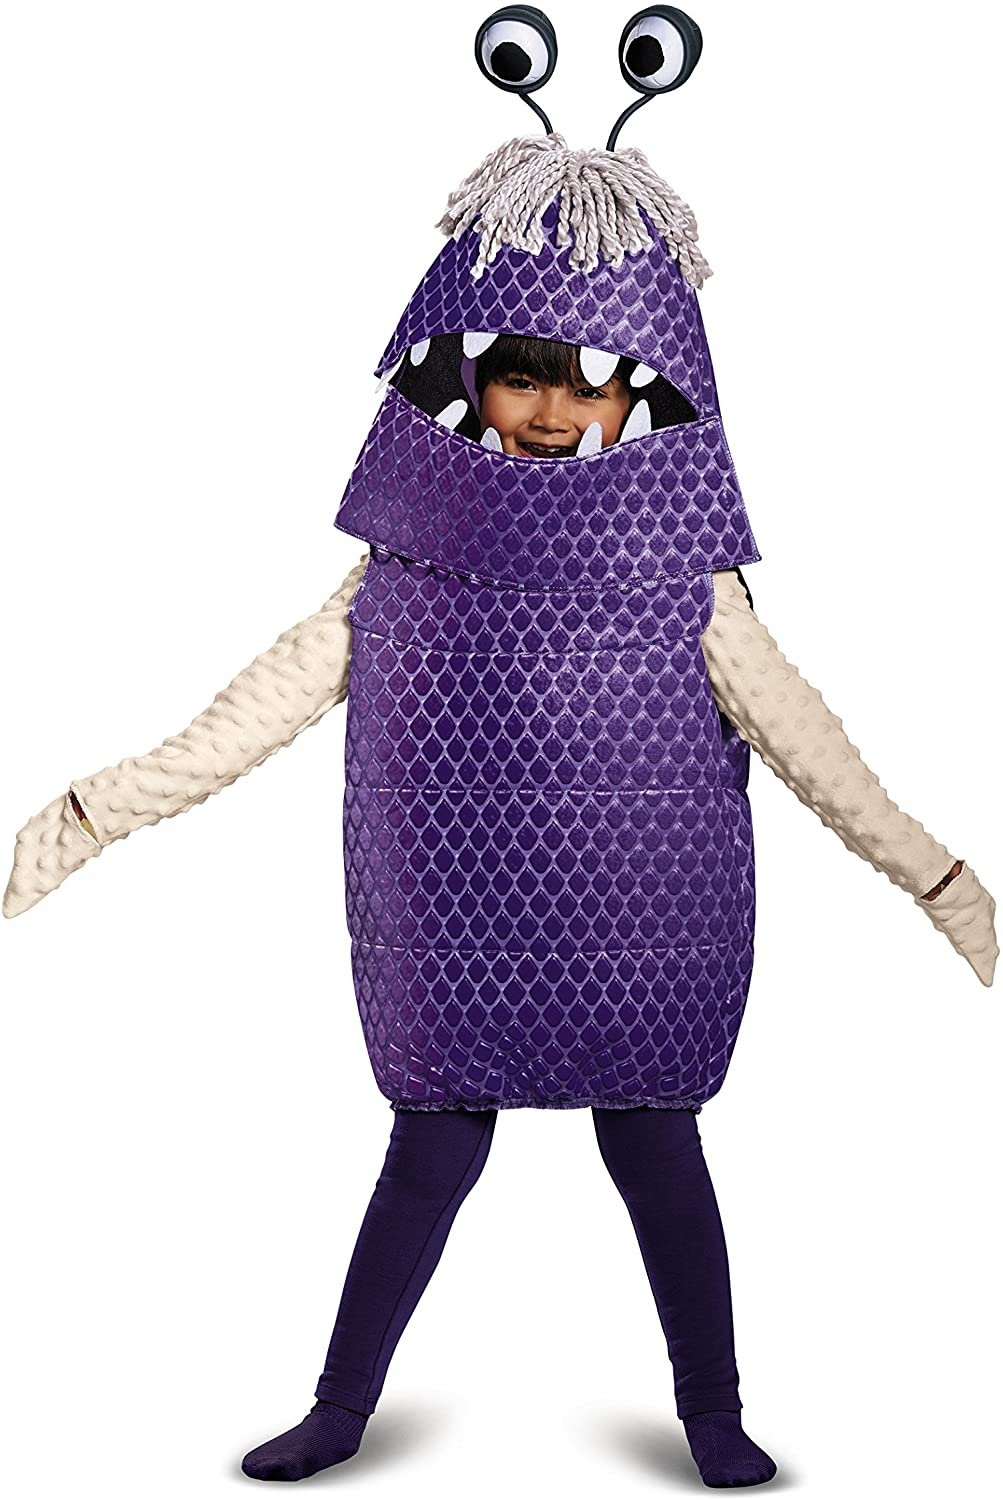 Boo Deluxe Toddler Costume Purple, Size Large (4-6) - Free Shipping and Returns